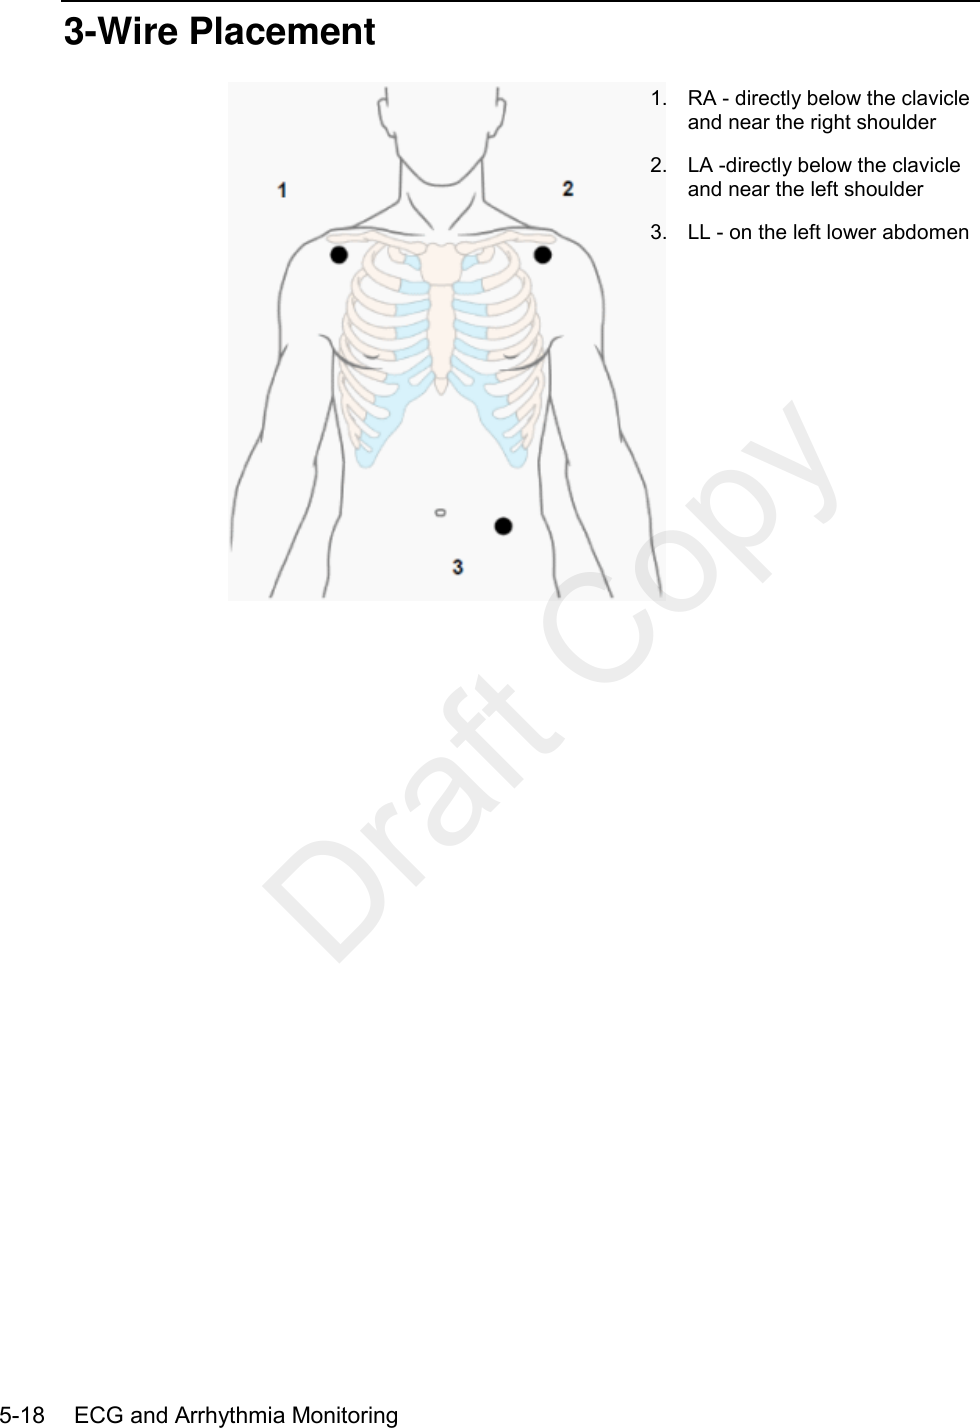    5-18    ECG and Arrhythmia Monitoring  3-Wire Placement  1.  RA - directly below the clavicle and near the right shoulder 2.  LA -directly below the clavicle and near the left shoulder 3. LL - on the left lower abdomen   Draft Copy